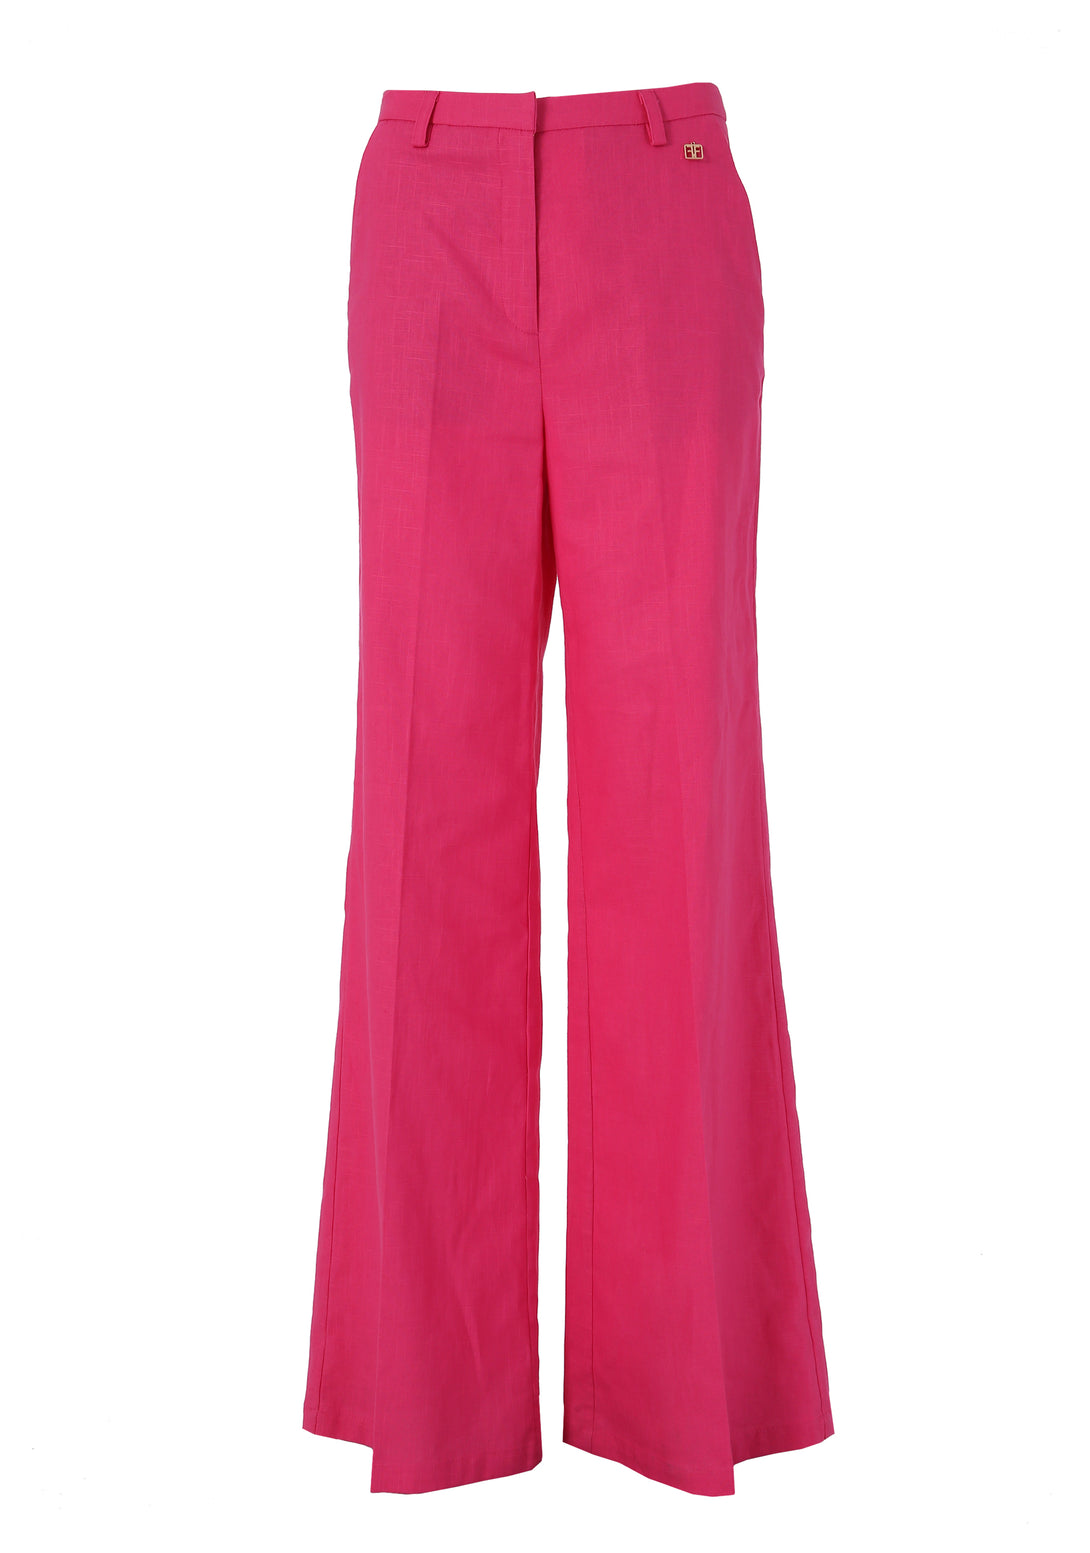 Palazzo pant flare made in cotton and linen